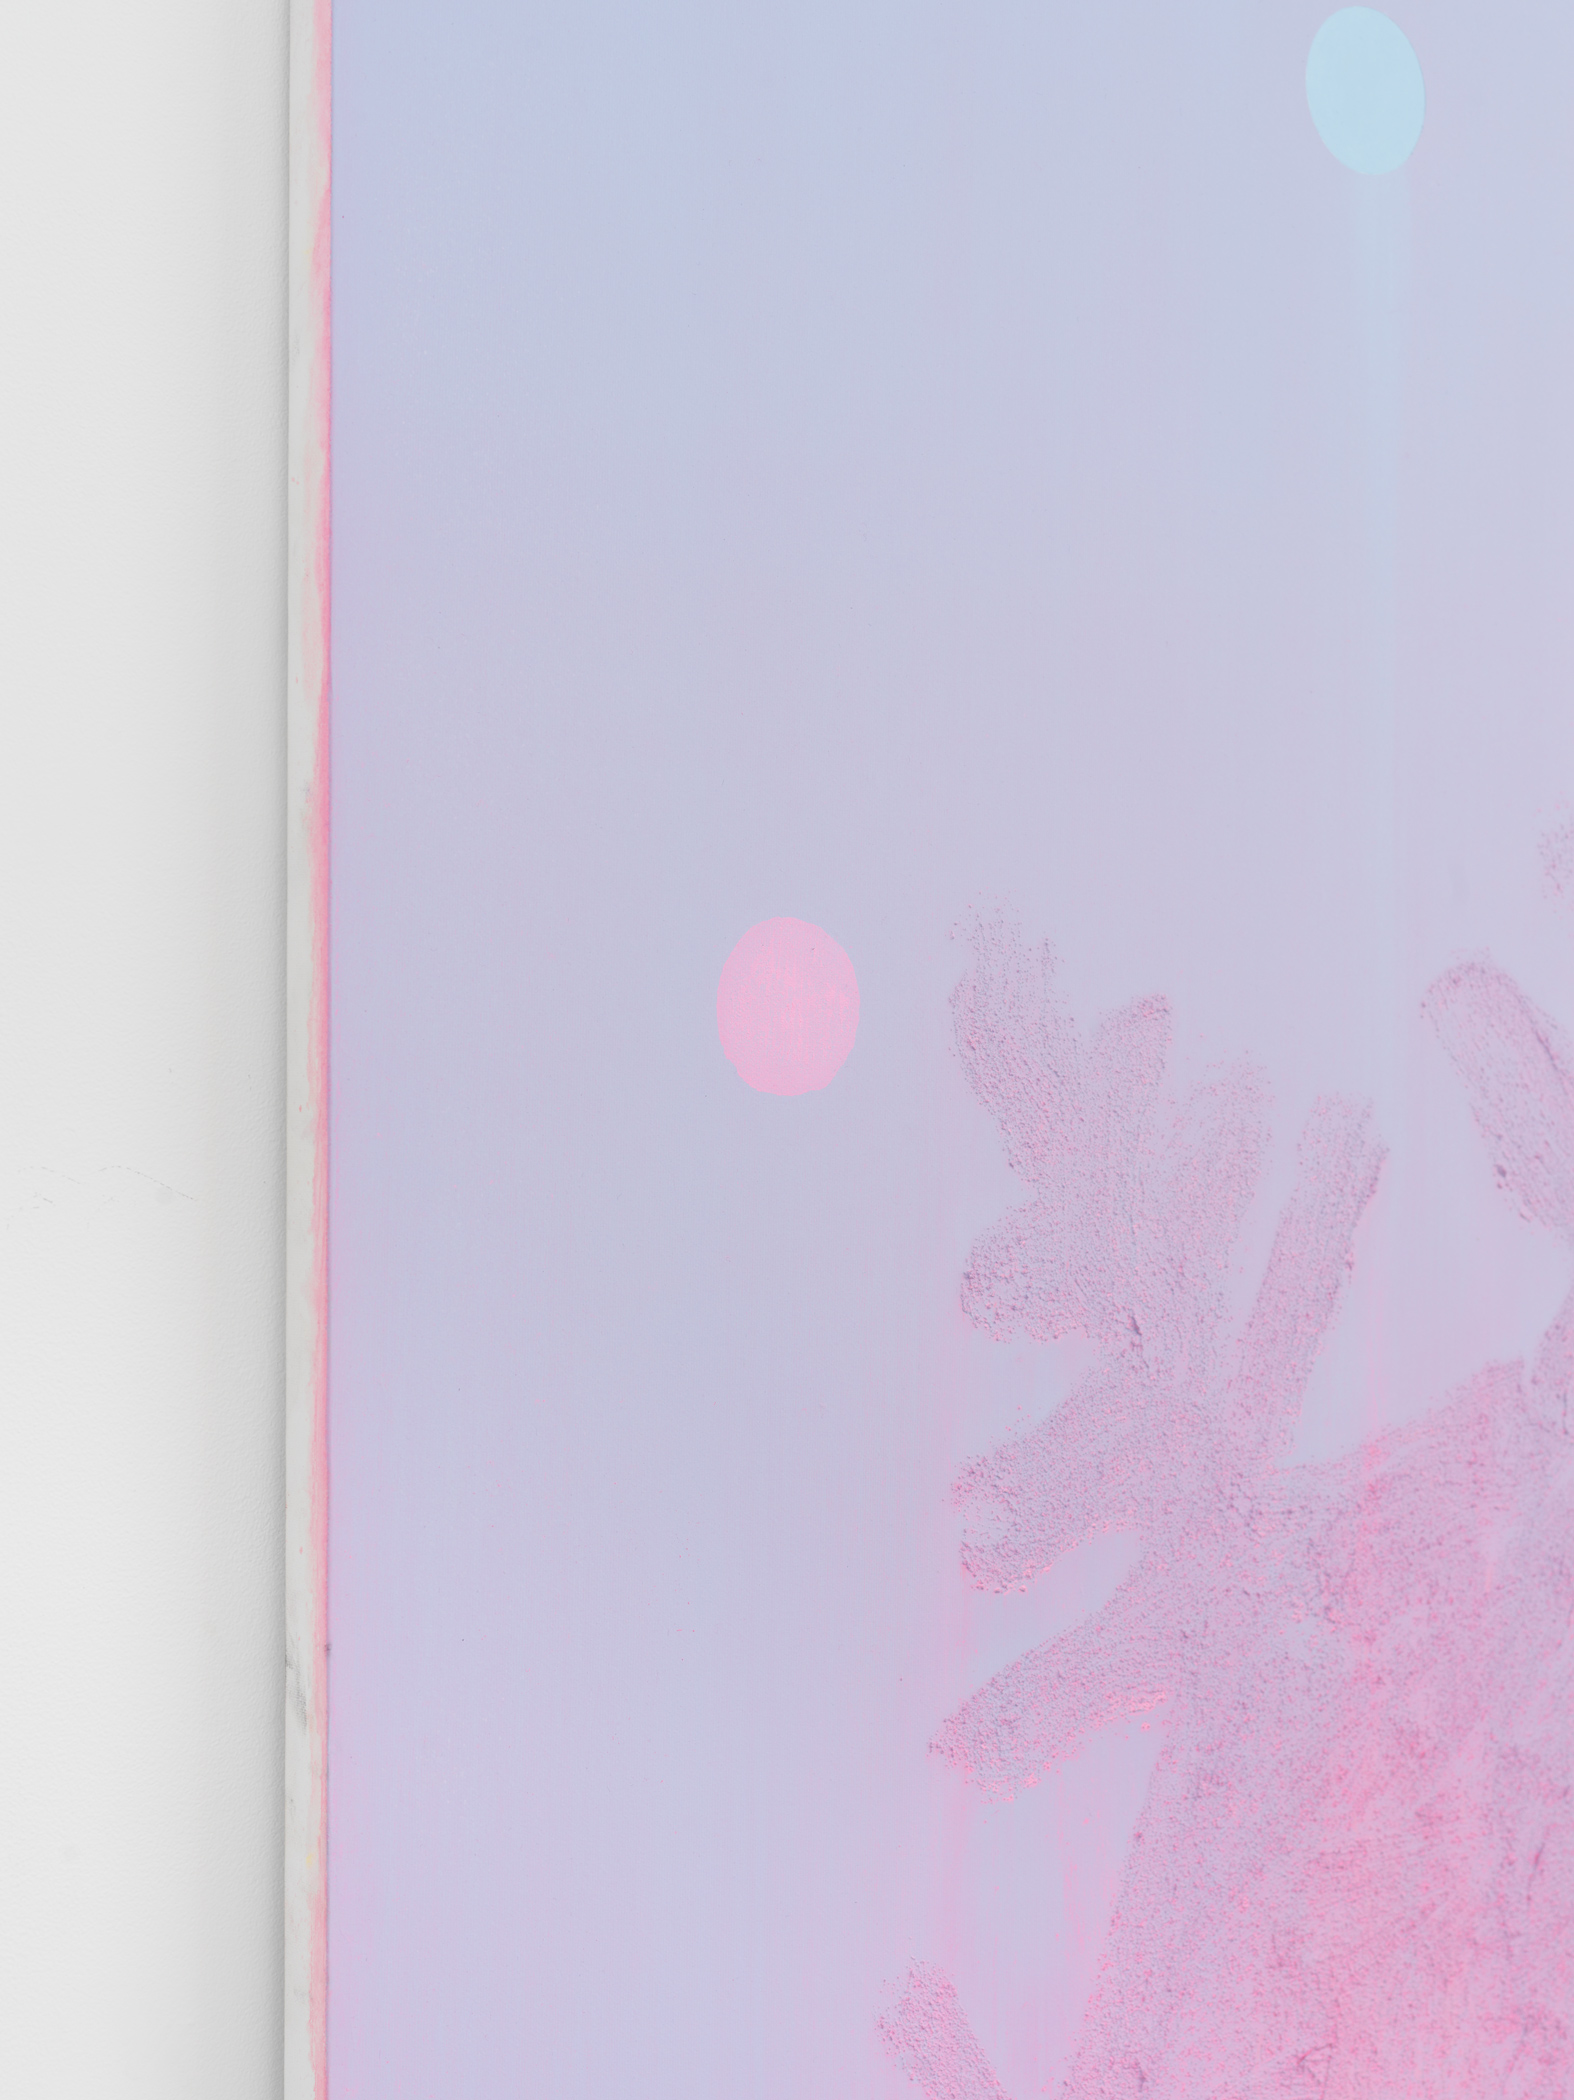 Alex Kwartler, Pink Snowflake (detail), 2019, Oil and pumice on linen, 72h x 48w in.